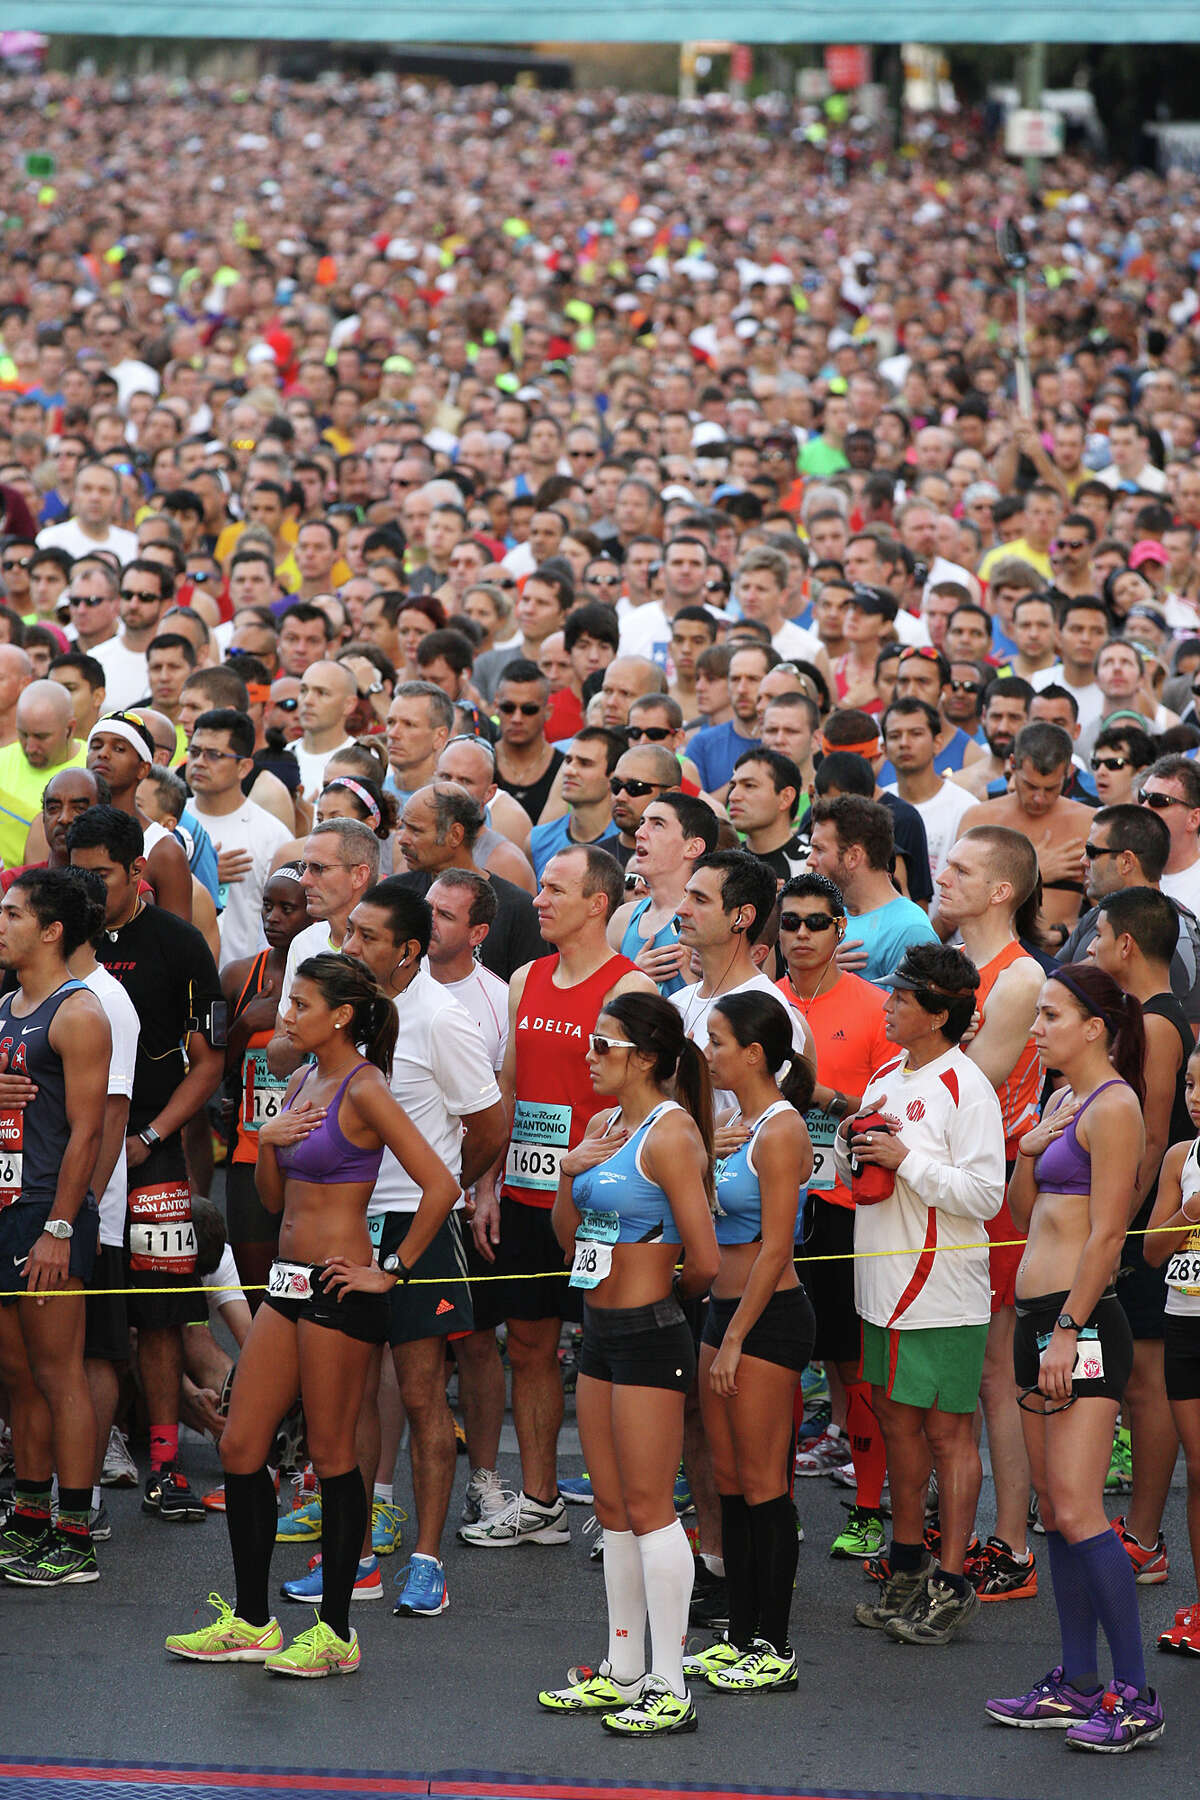 Around 25,000 runners are in place as the National Anthem is sung before the start of the Rock 'n' Roll San Antonio Marathon and 1/2 Marathon, Sunday, Nov. 11, 2012.